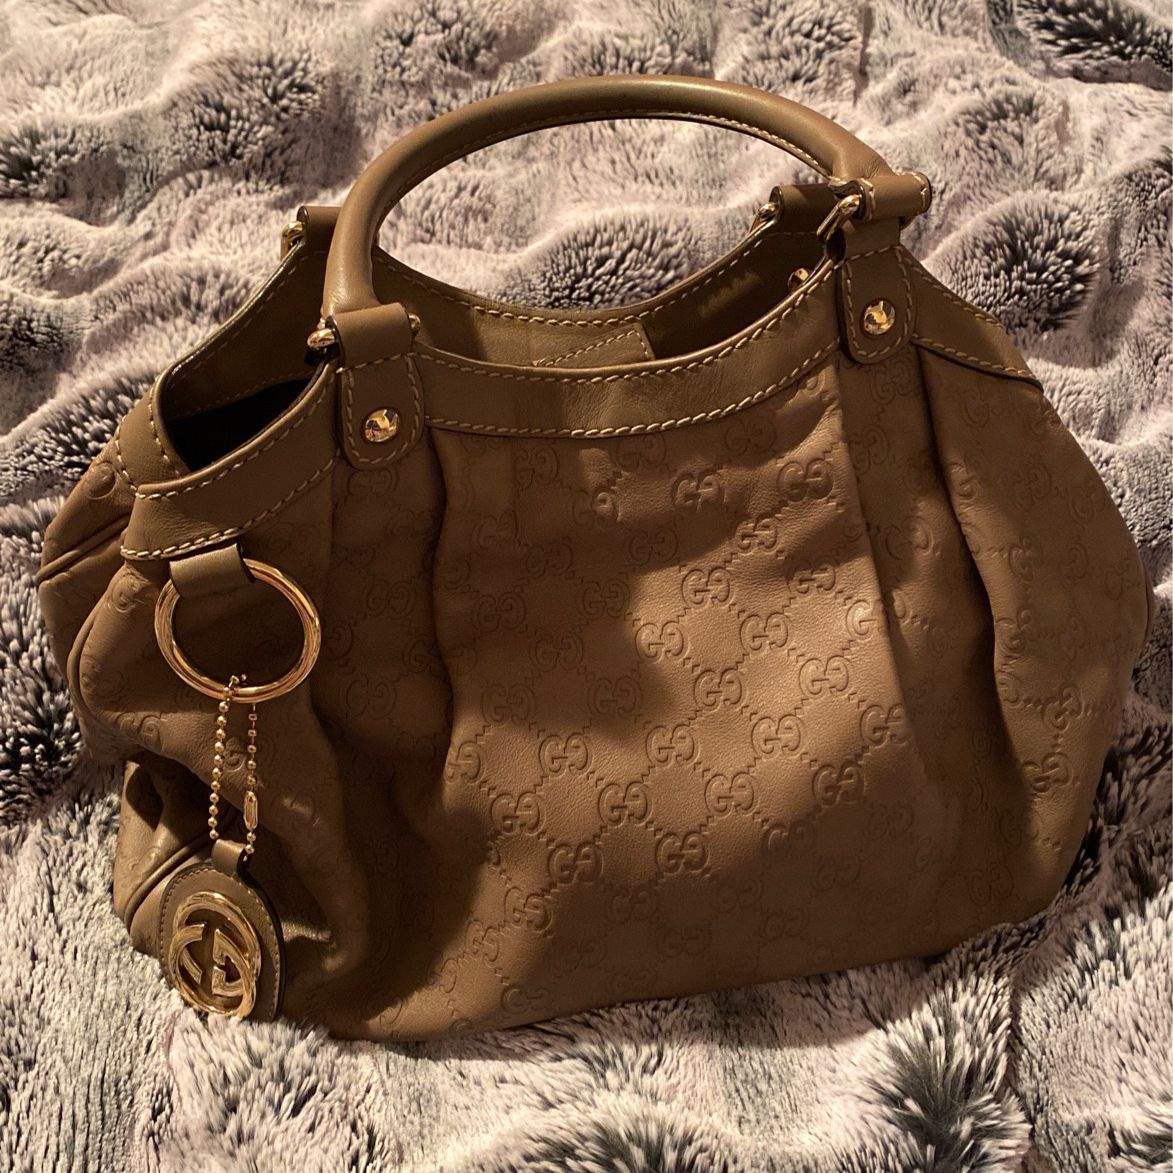 Authentic Leather Gucci Tote Bag